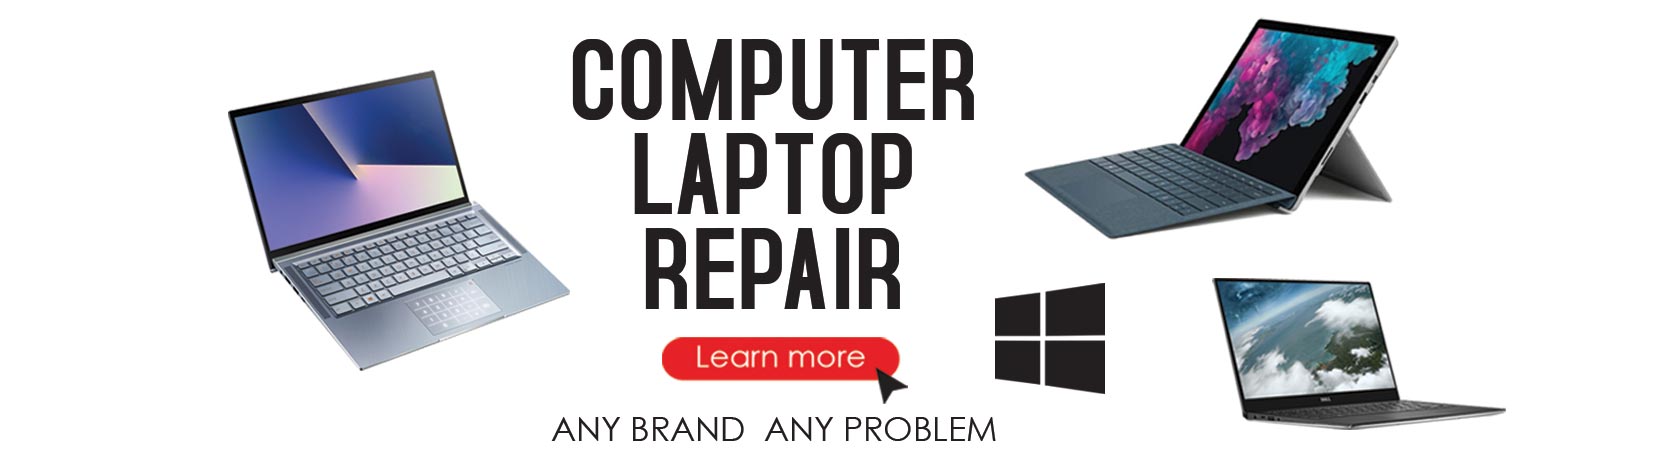 laptops for graphic design 2015